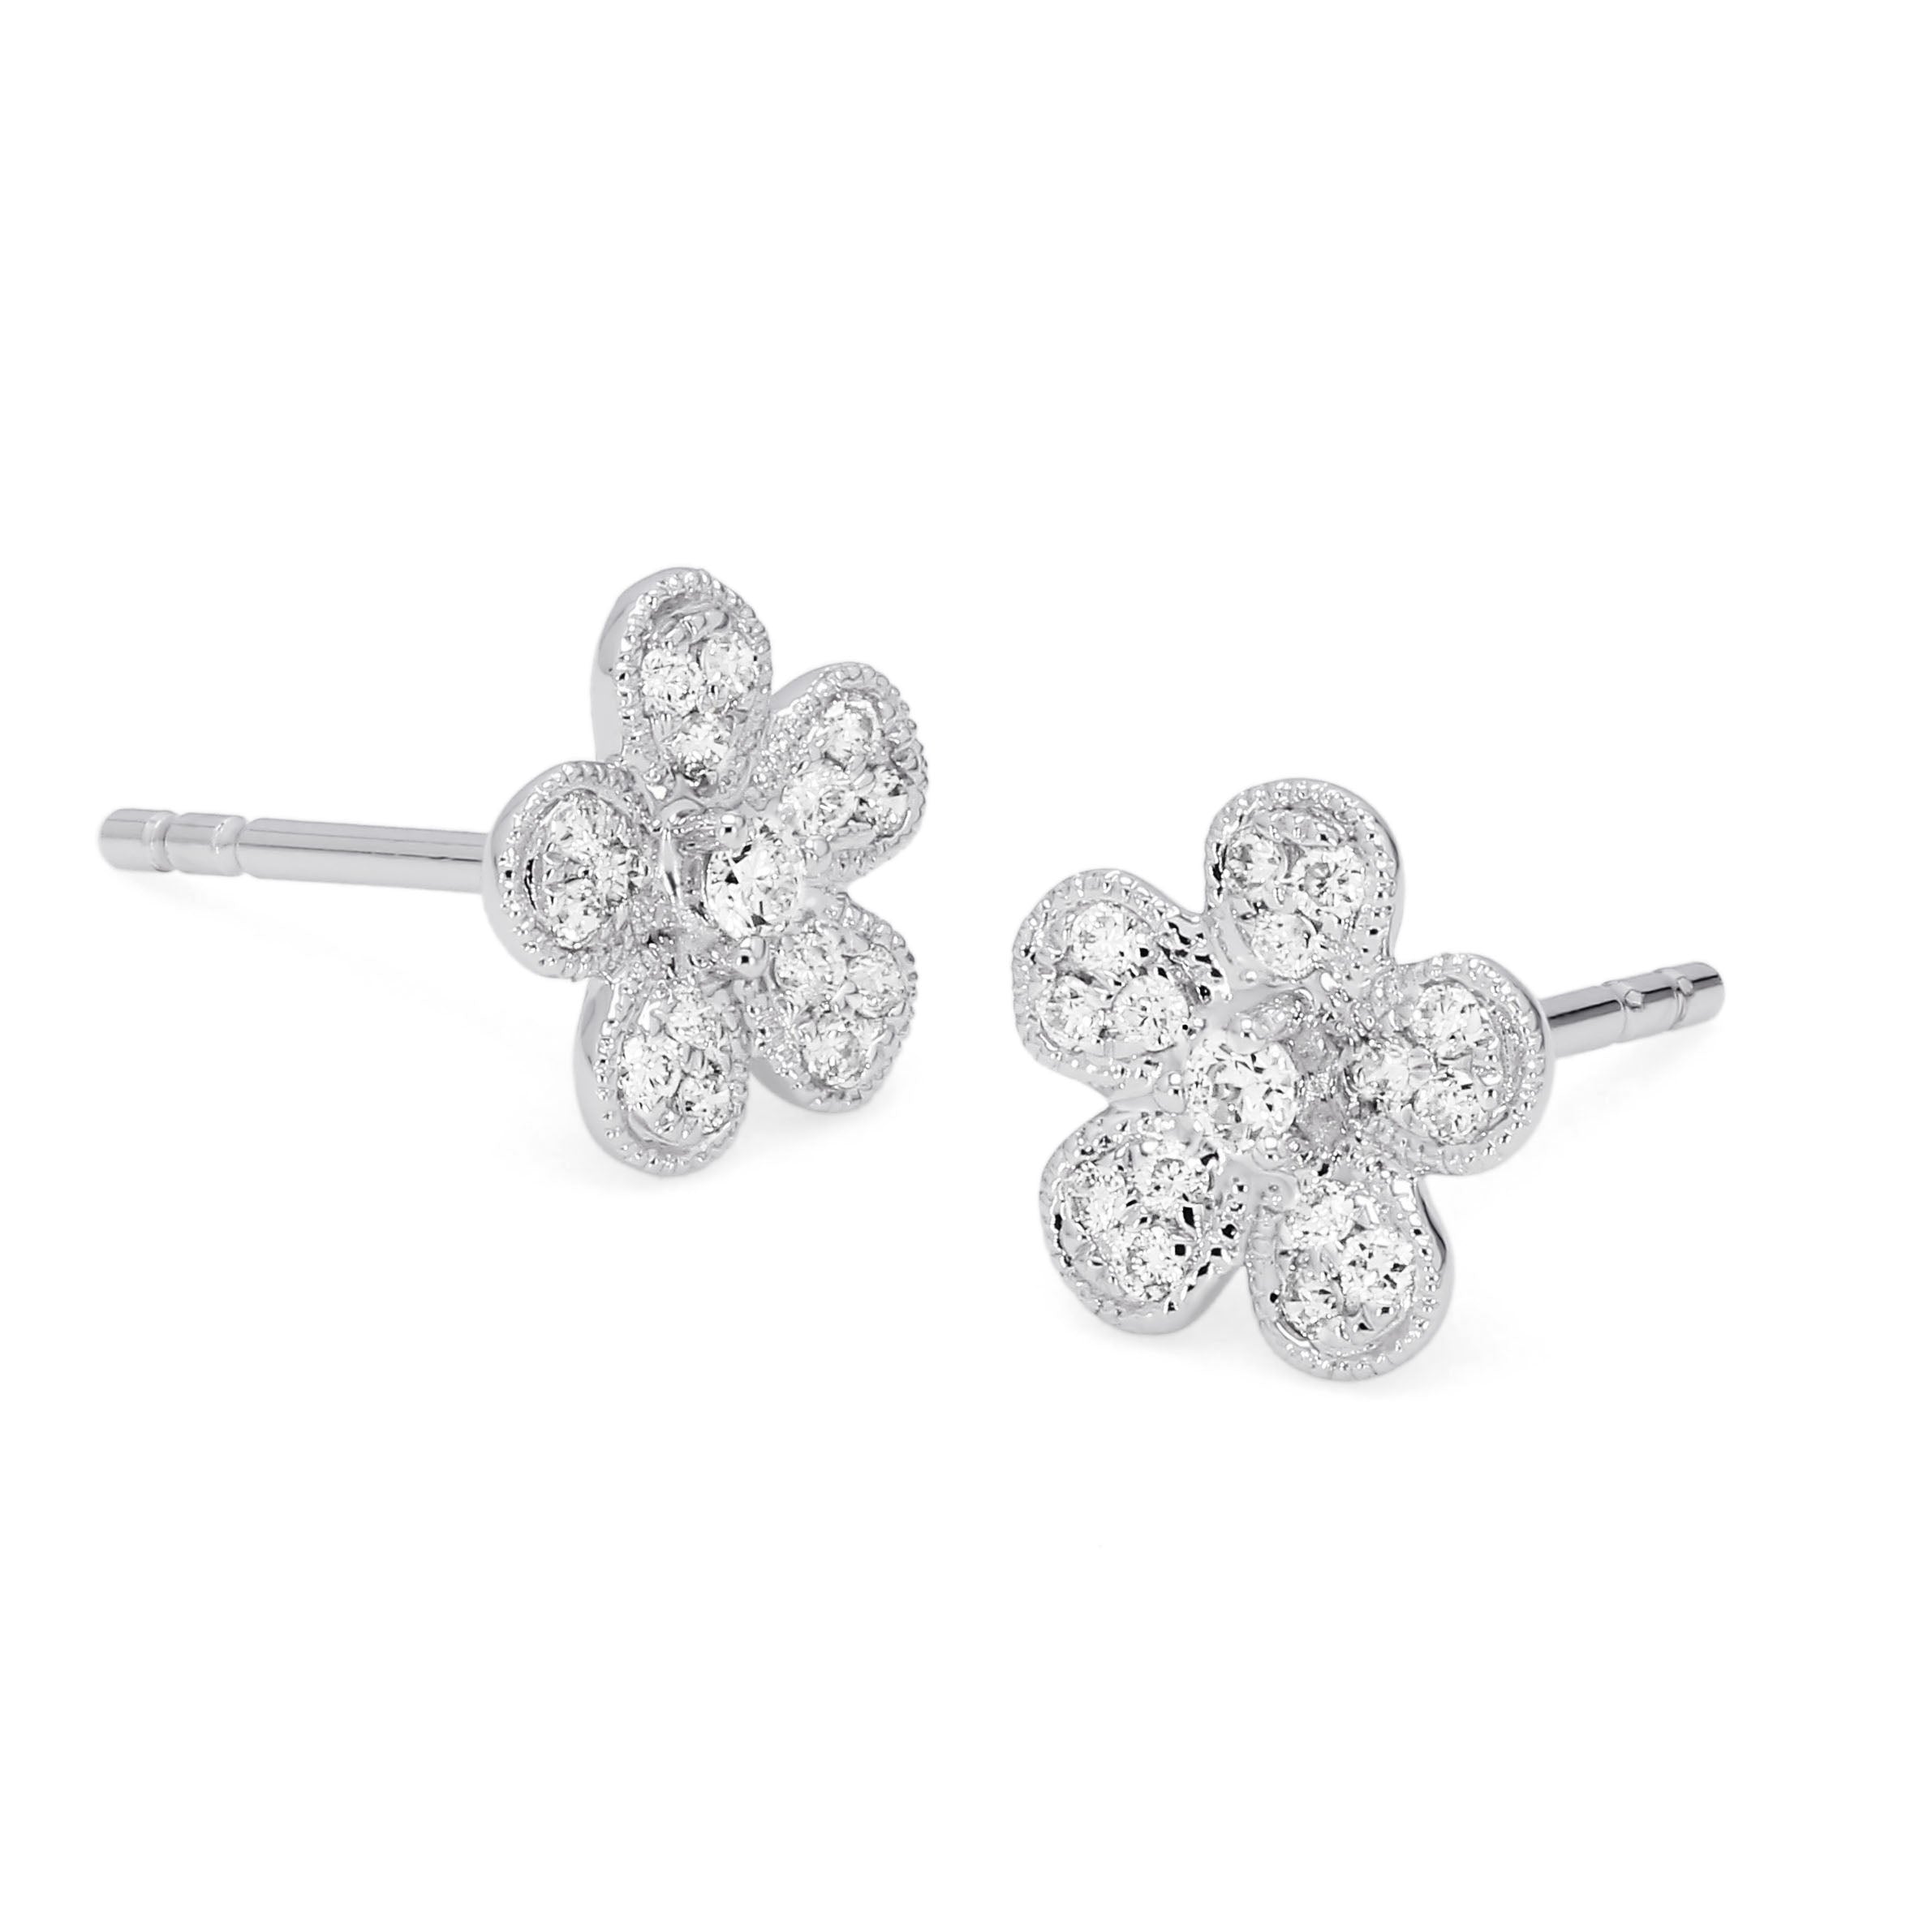 Adamar Jewels Cherry Blossom Earstuds in 18K white gold set with diamonds